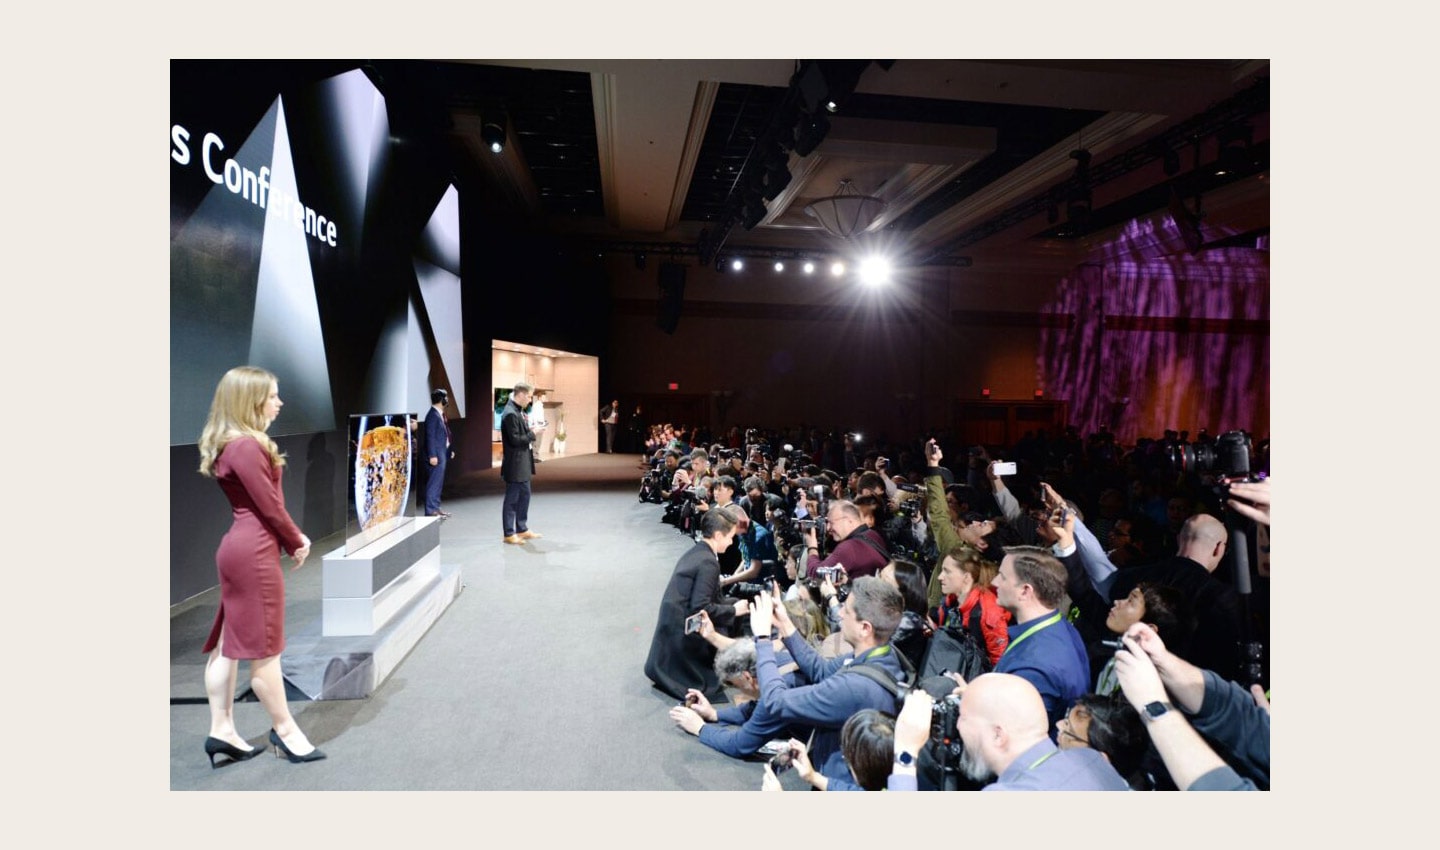 Side view of the CES 2019 LG Press Conference with a pair of male and female models onstage posing while reporters are recording and taking pictures